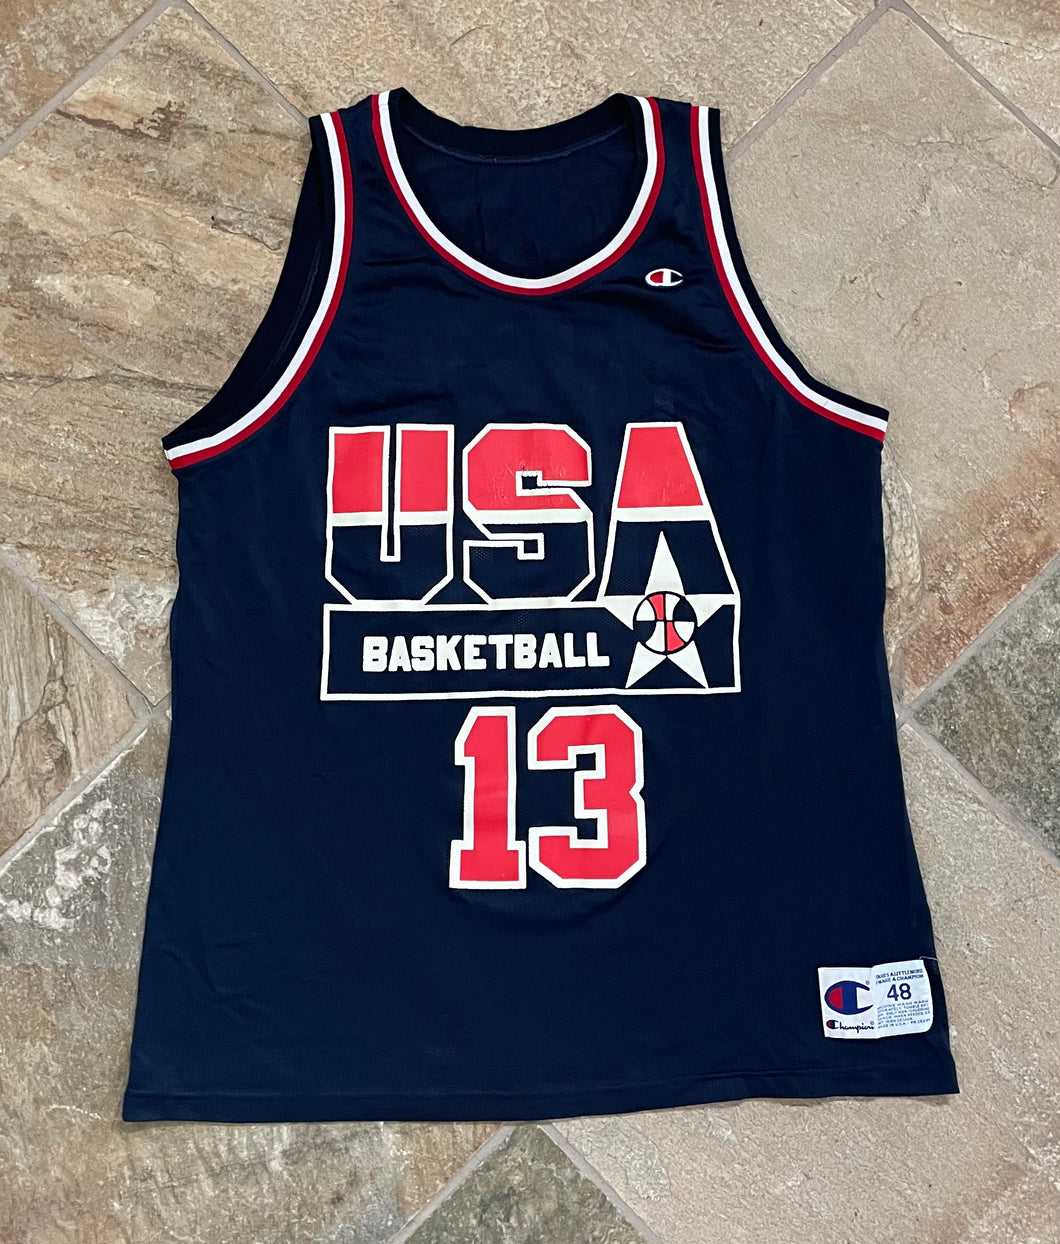 Vintage Team USA Shaquille O’Neal Champion Basketball Jersey, Size 48, XL